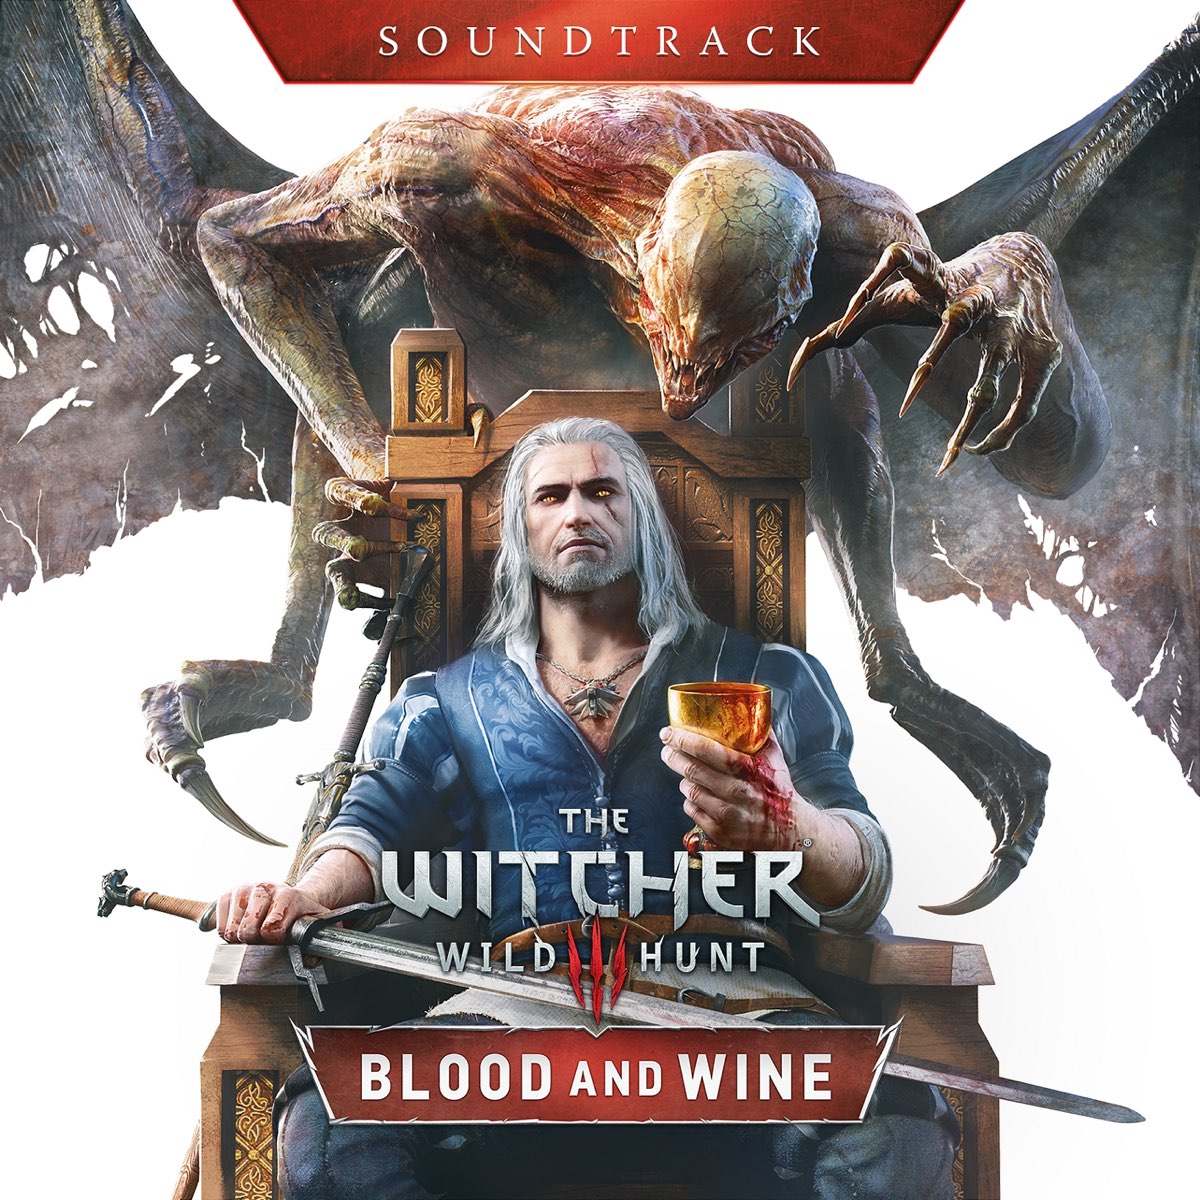 The witcher 3 soundtrack by фото 8